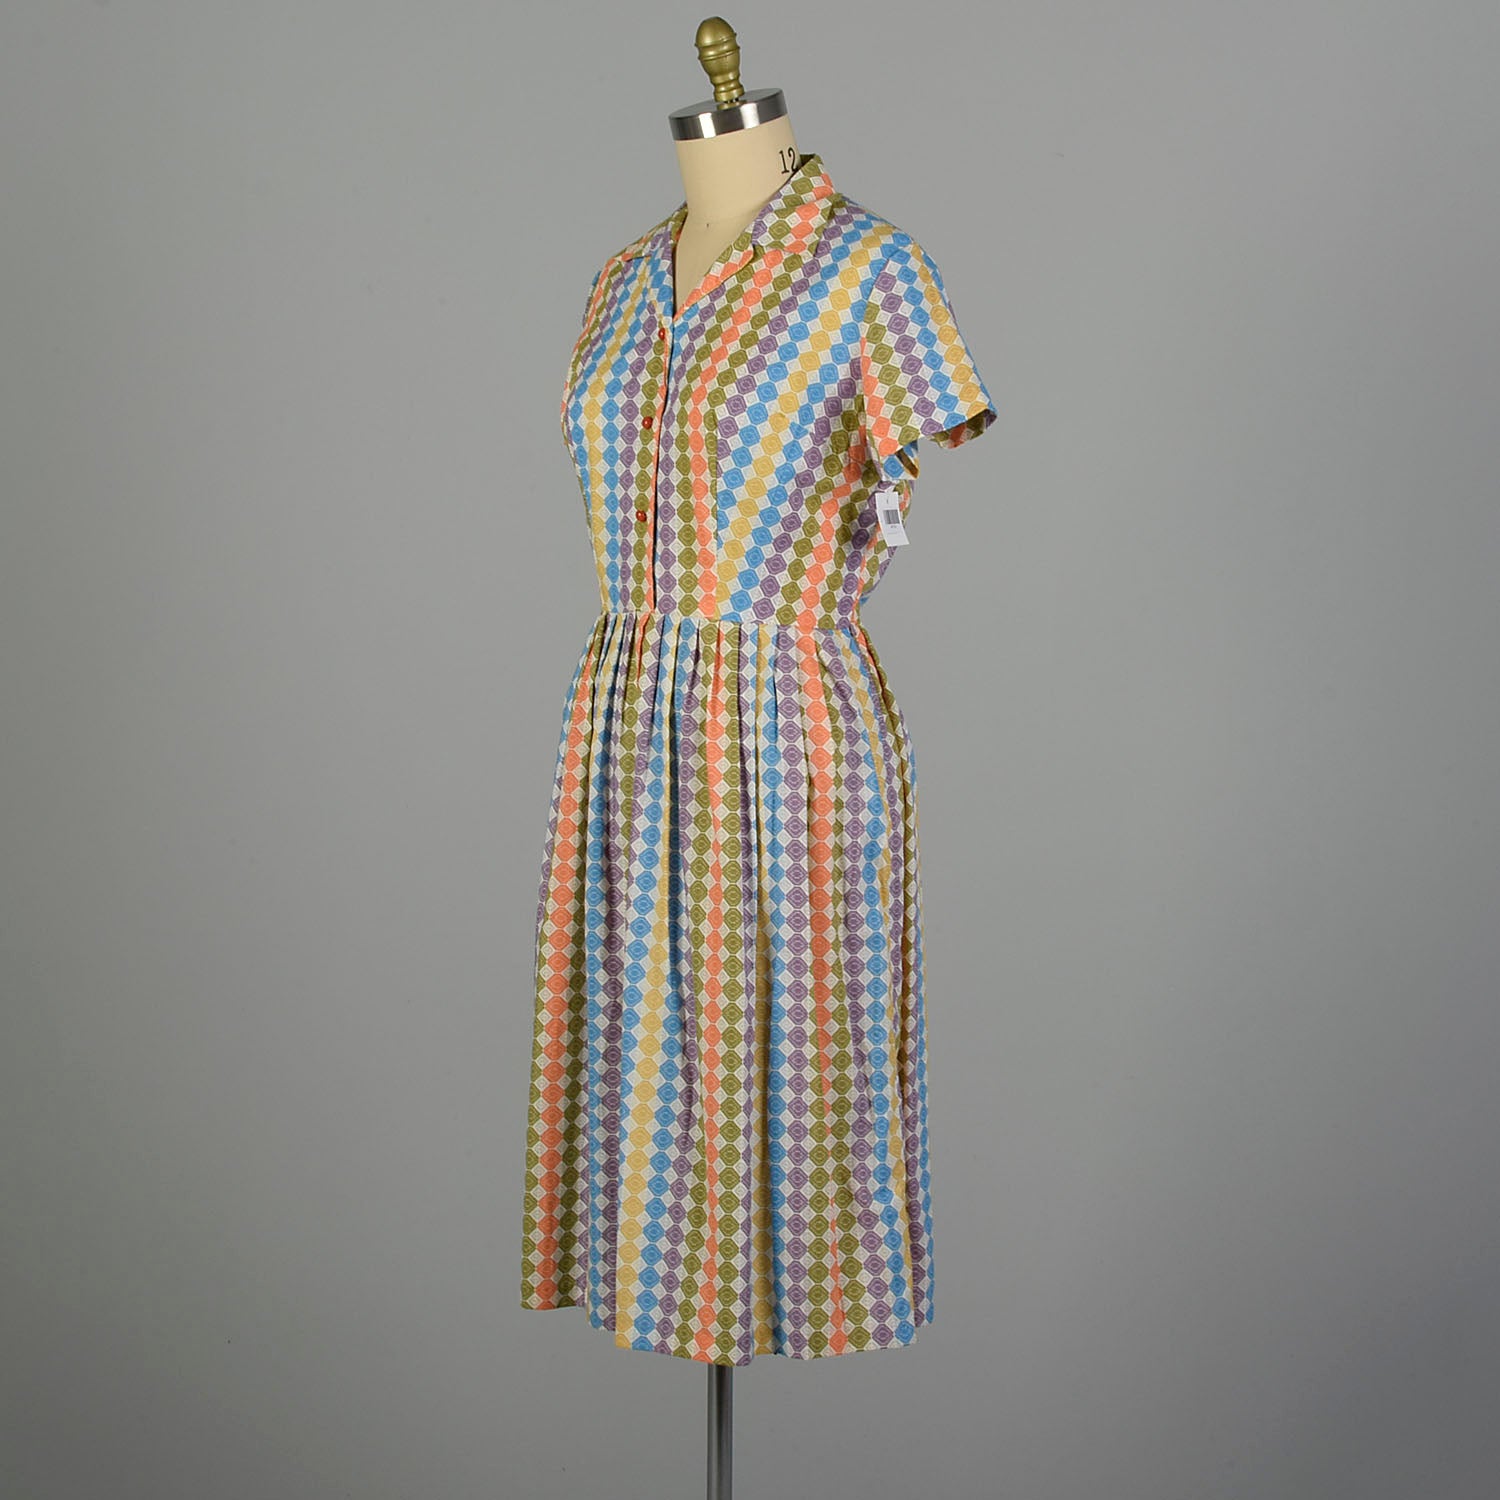 Large 1950s Cotton Day Dress with Colorful Print Shirtwaist